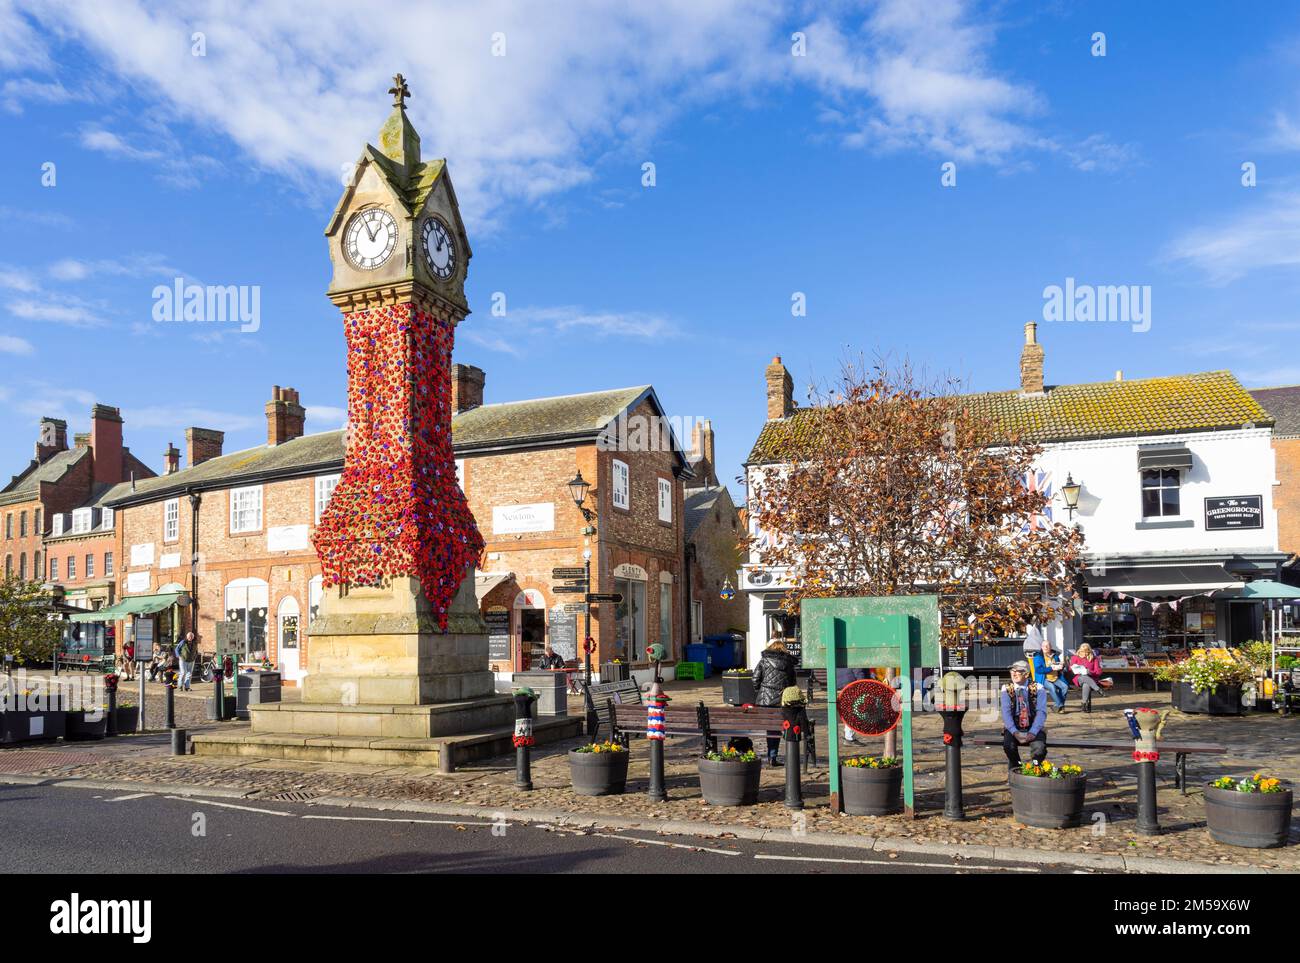 Thirsk North Yorkshire Thirsk Market place Clock Tower Thirsk avec des fils bombardant thirsk North Yorkshire Angleterre GB Europe Banque D'Images